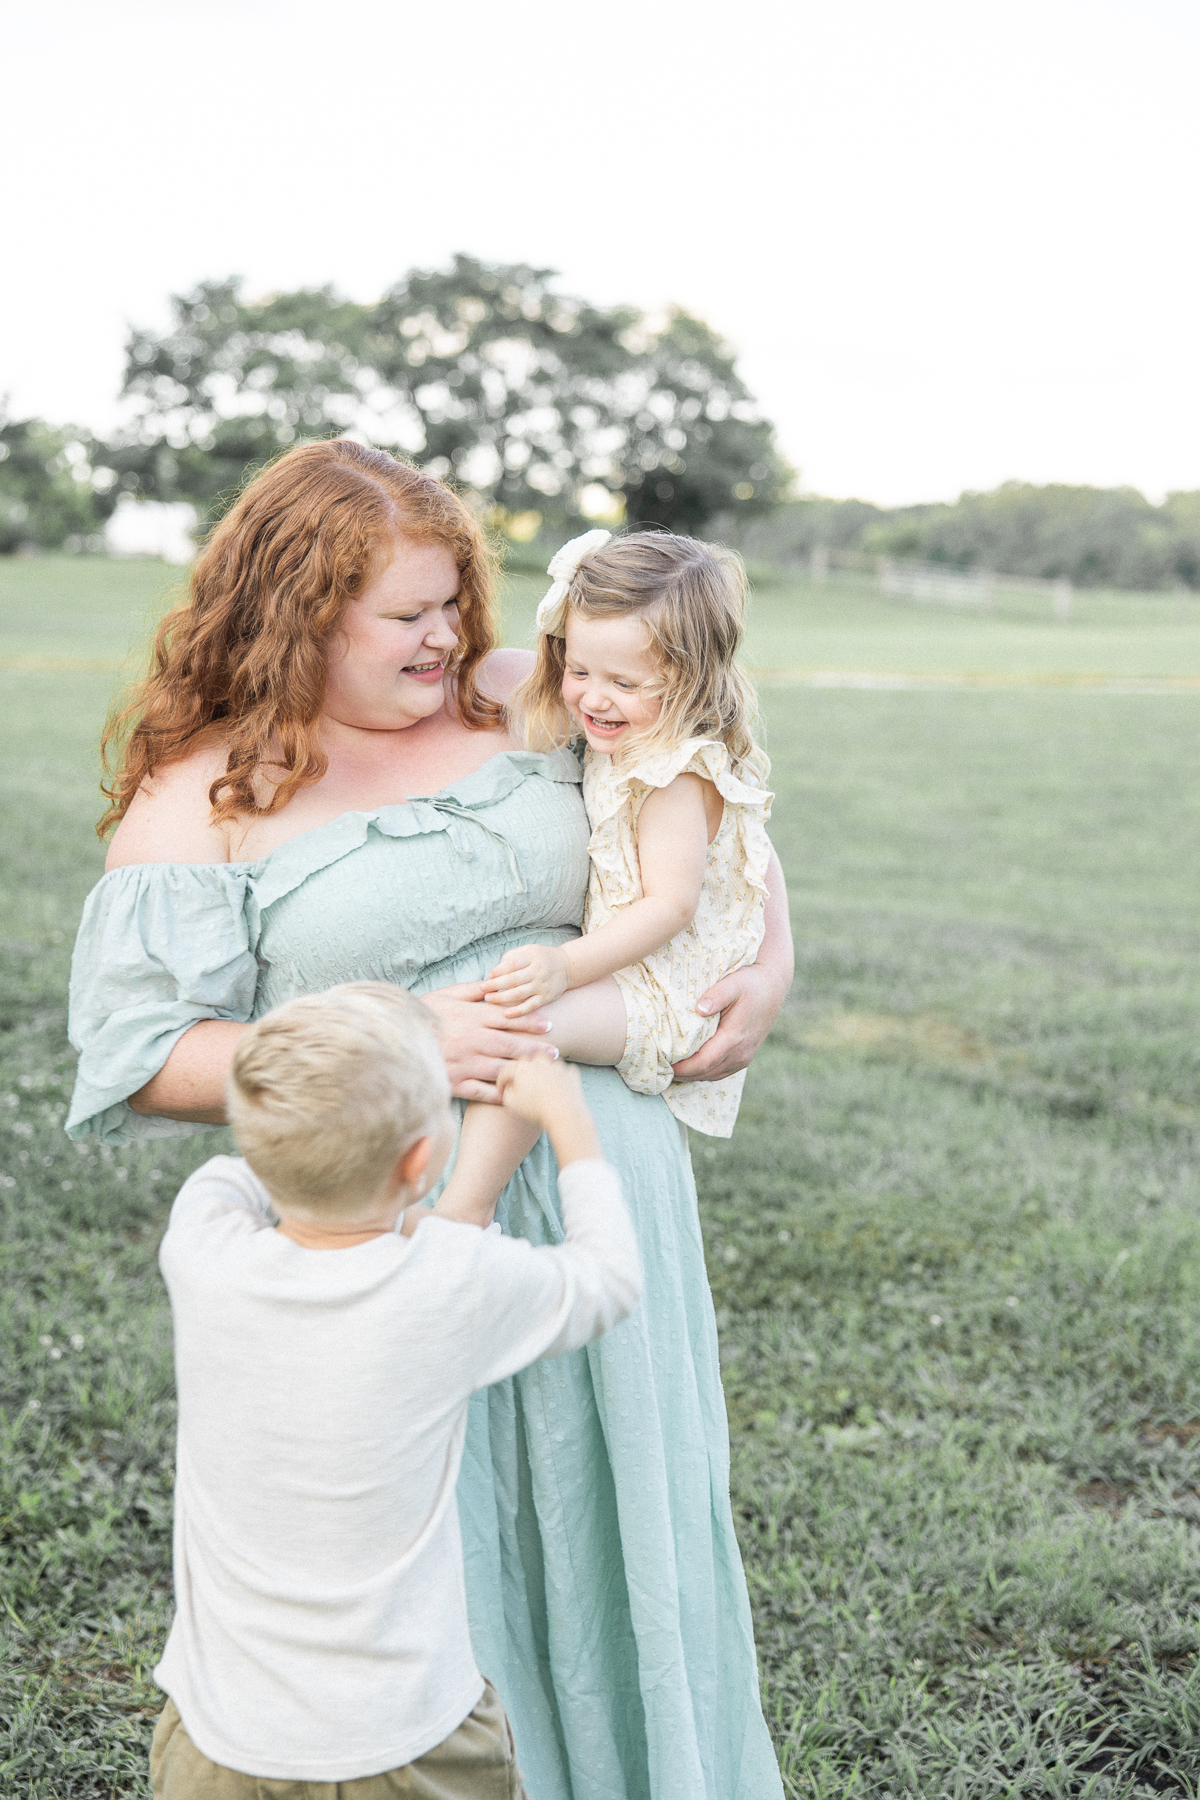 A holds her toddler daughter as her son tickles her leg while standing in a field of grass indianapolis baby shower venues